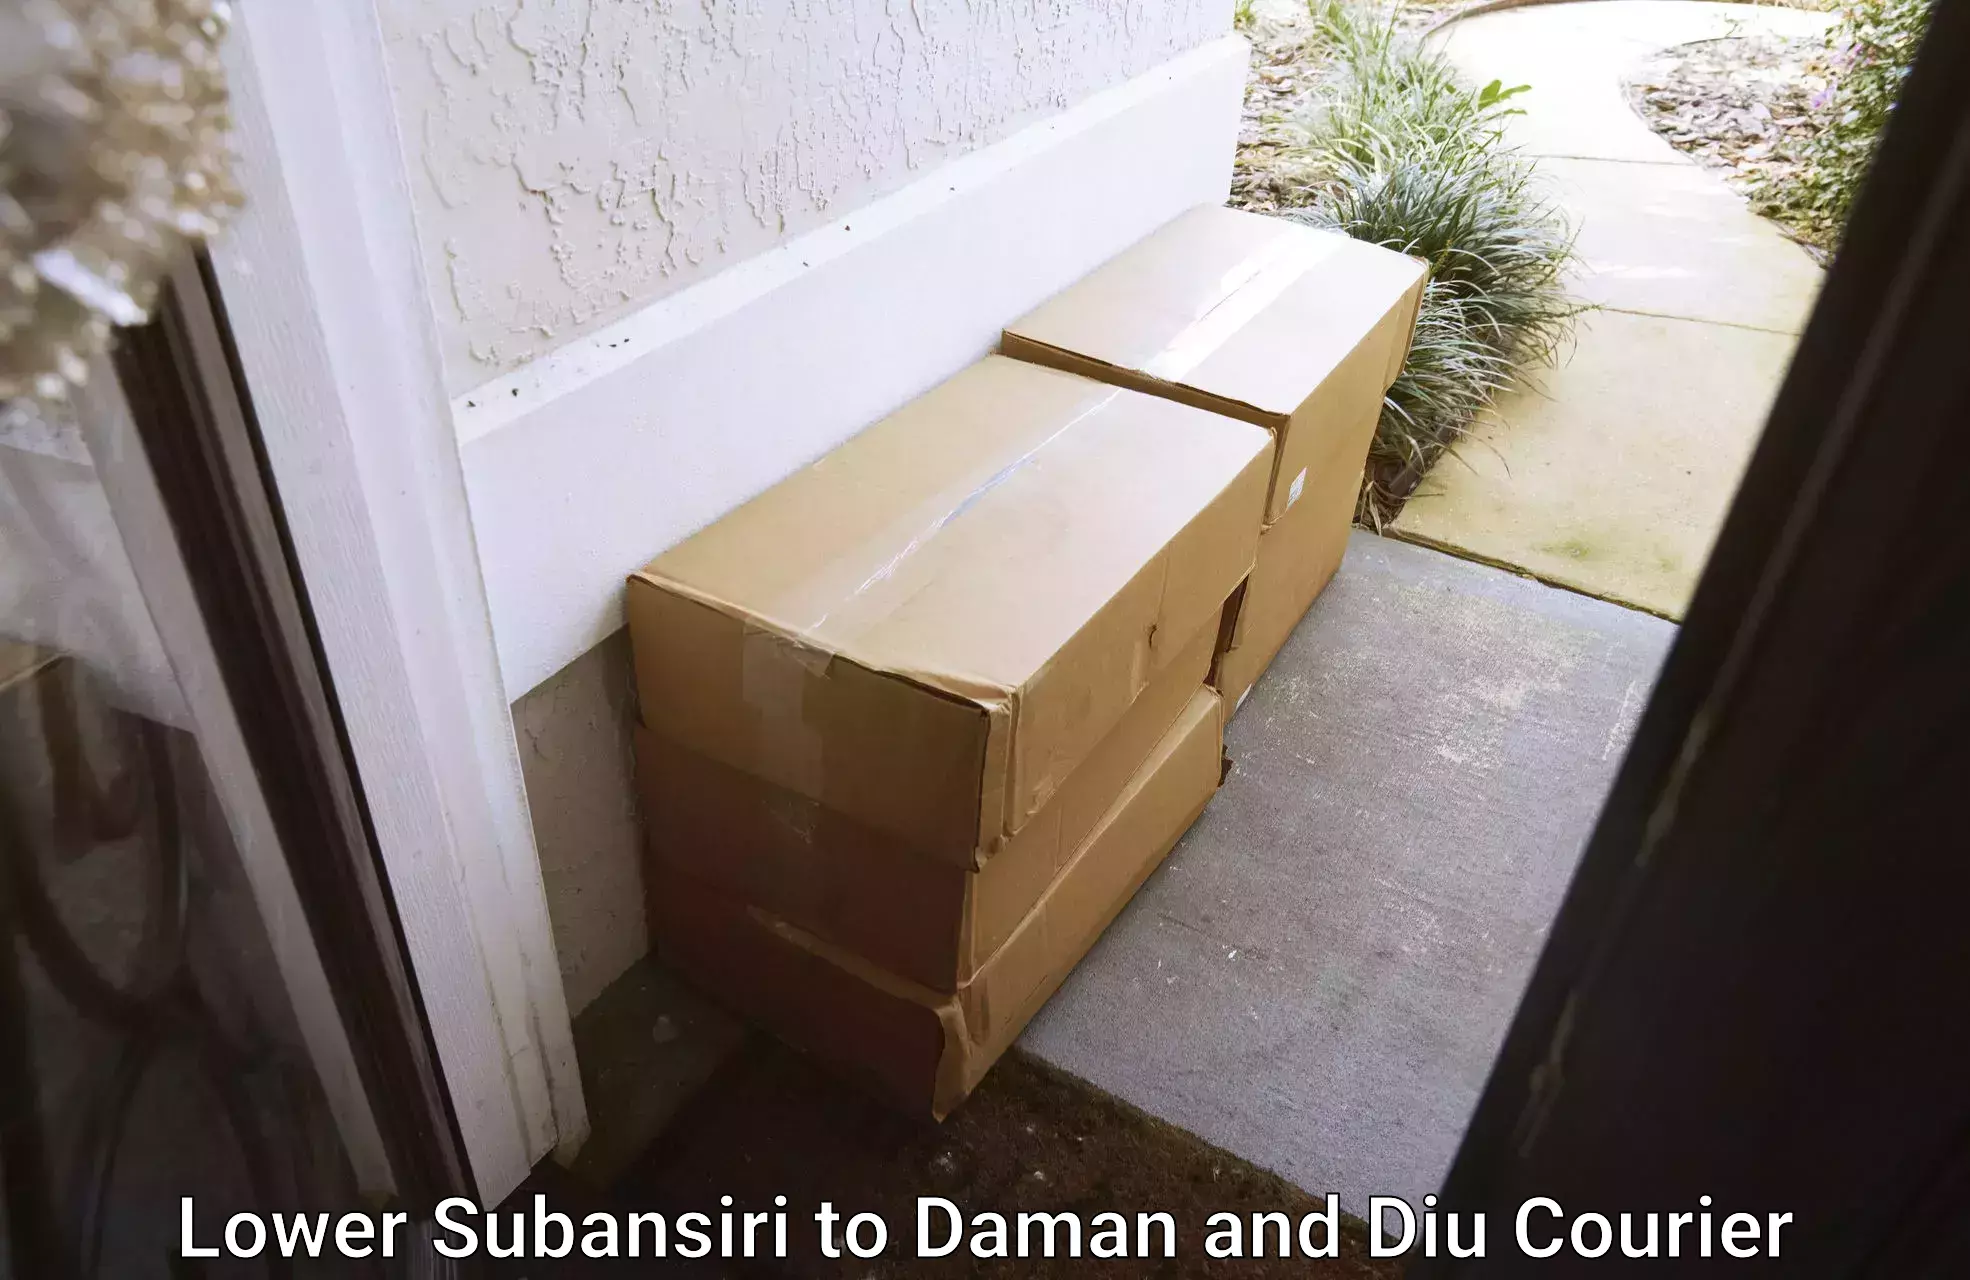 Easy access courier services Lower Subansiri to Daman